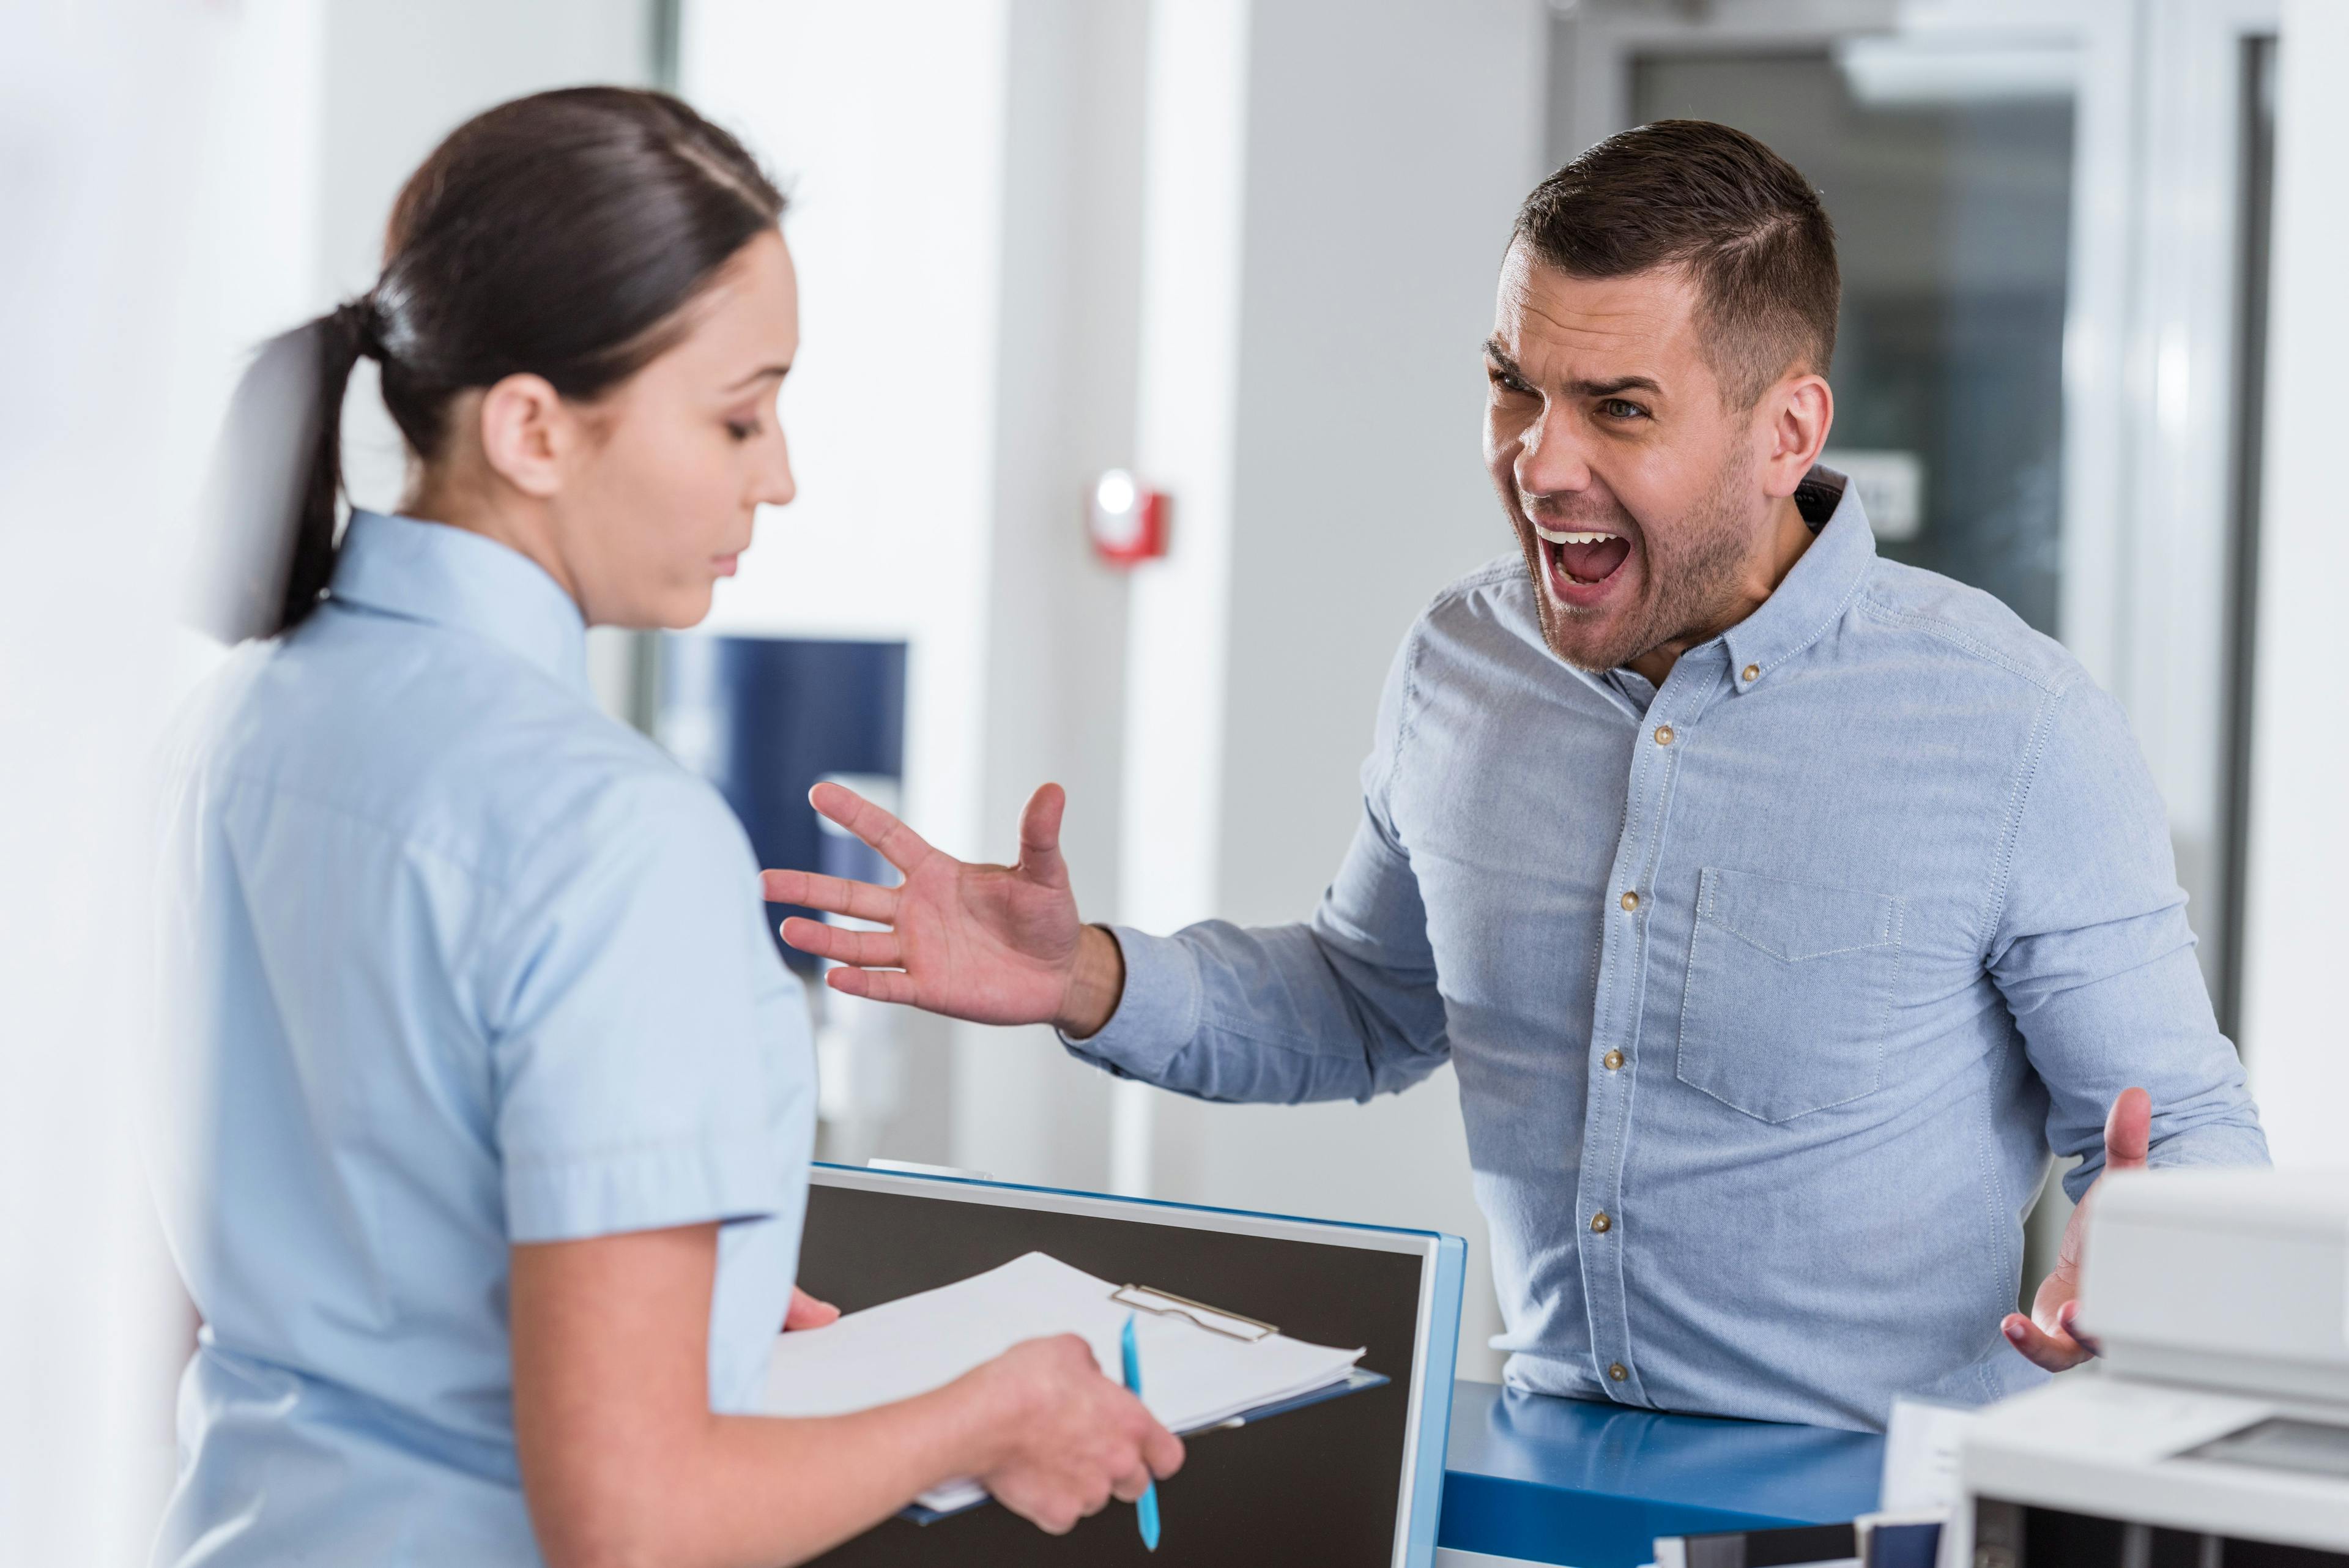 Angry patient confronting practice staff member 